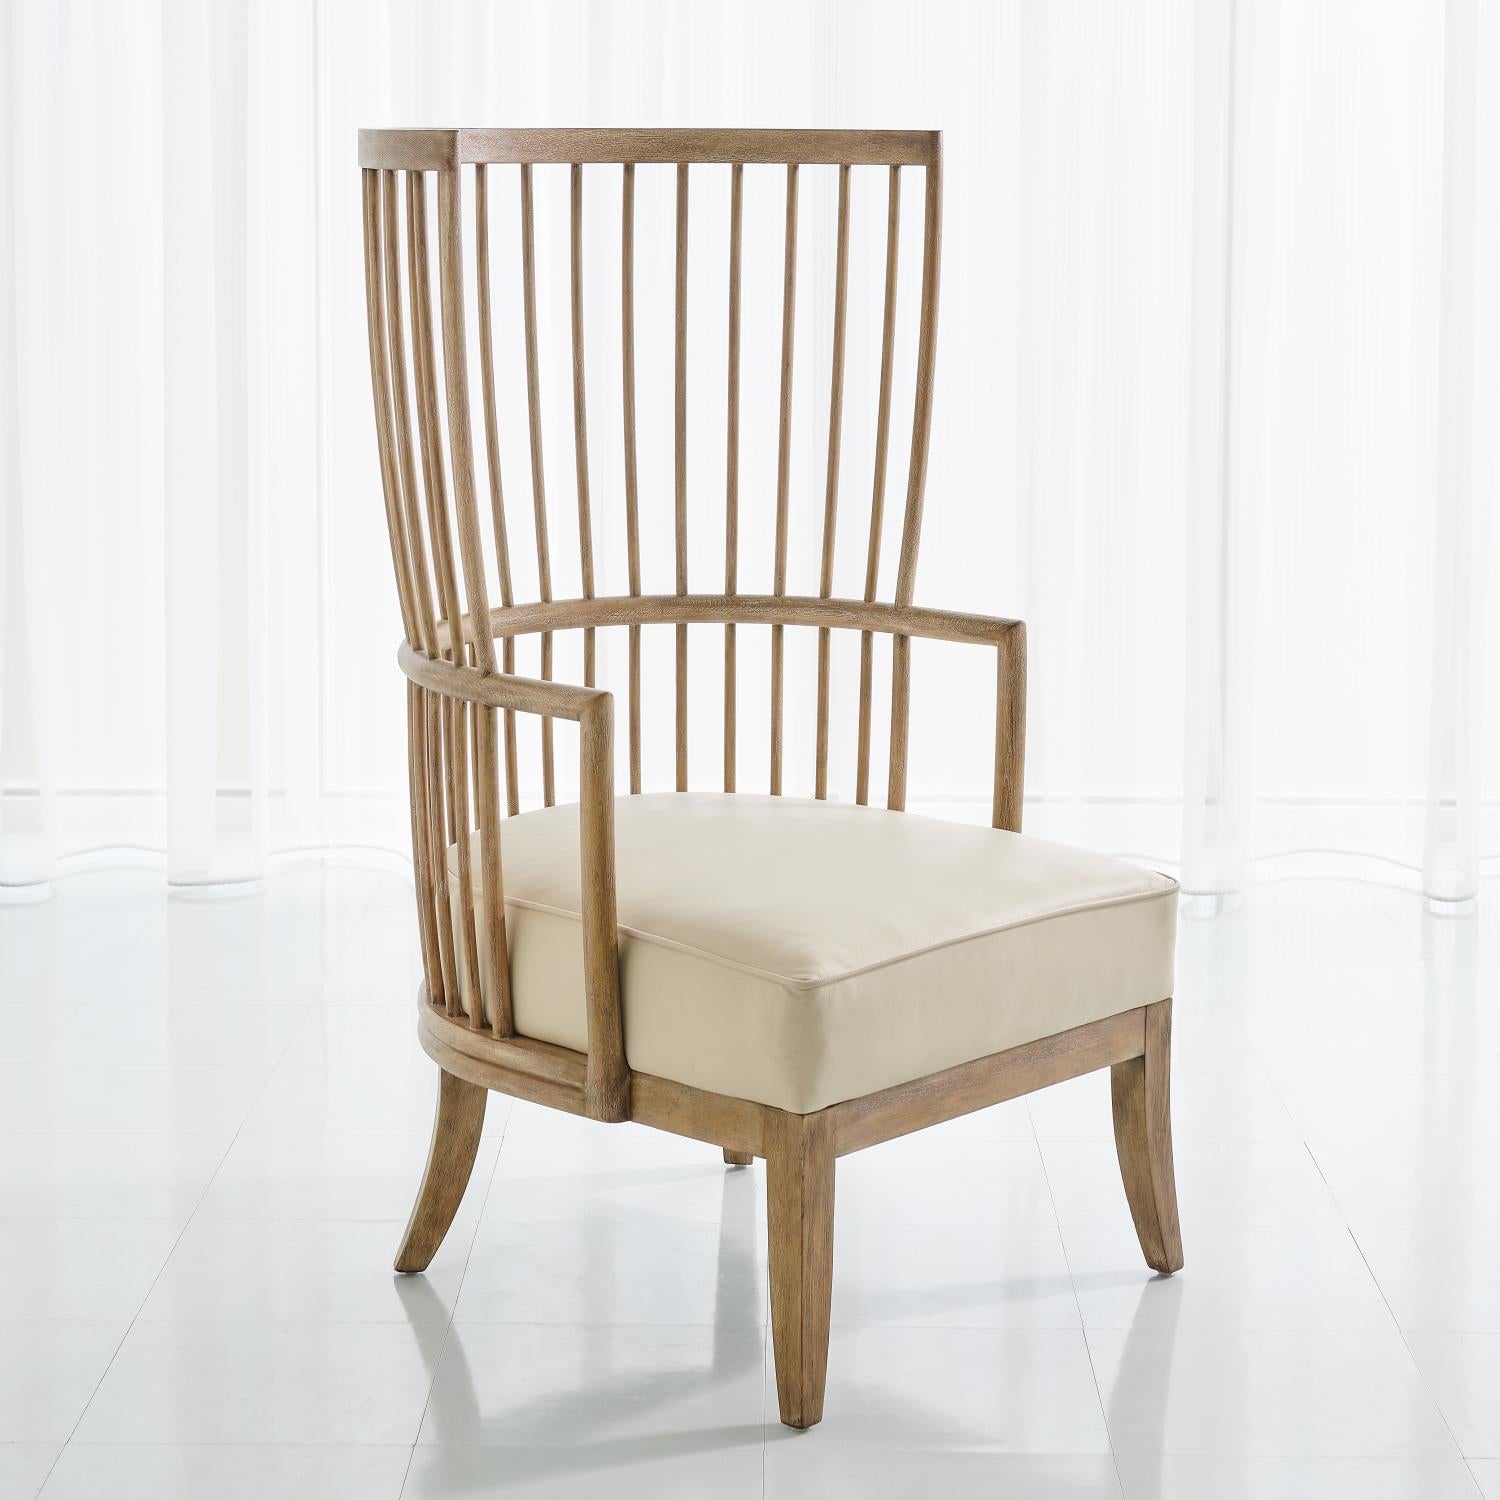 Spindle Wing Chair - Beige Leather - Grats Decor Interior Design & Build Inc.